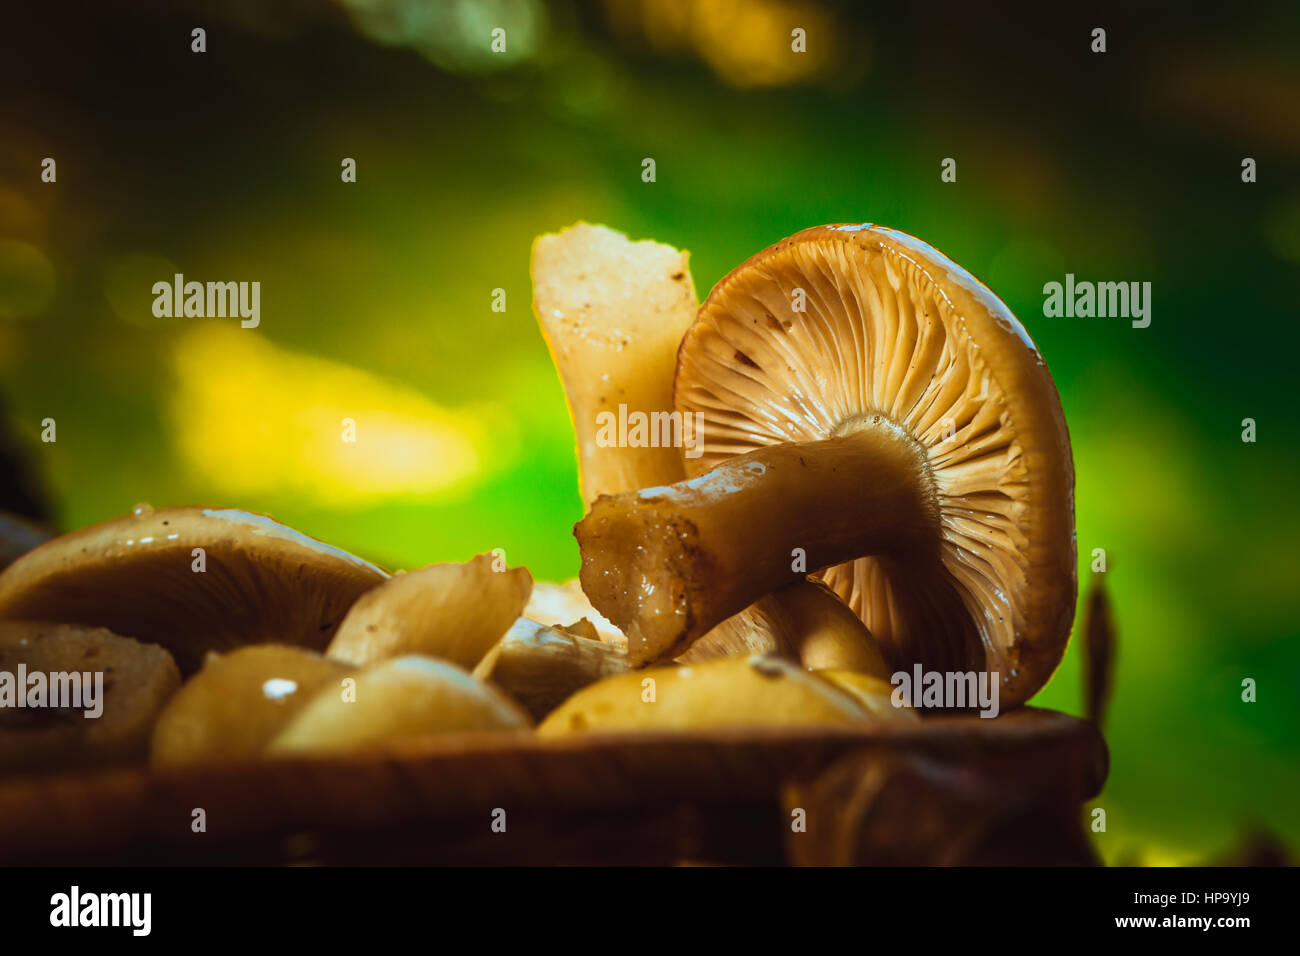 russula mushrooms in a wicker basket close up Stock Photo